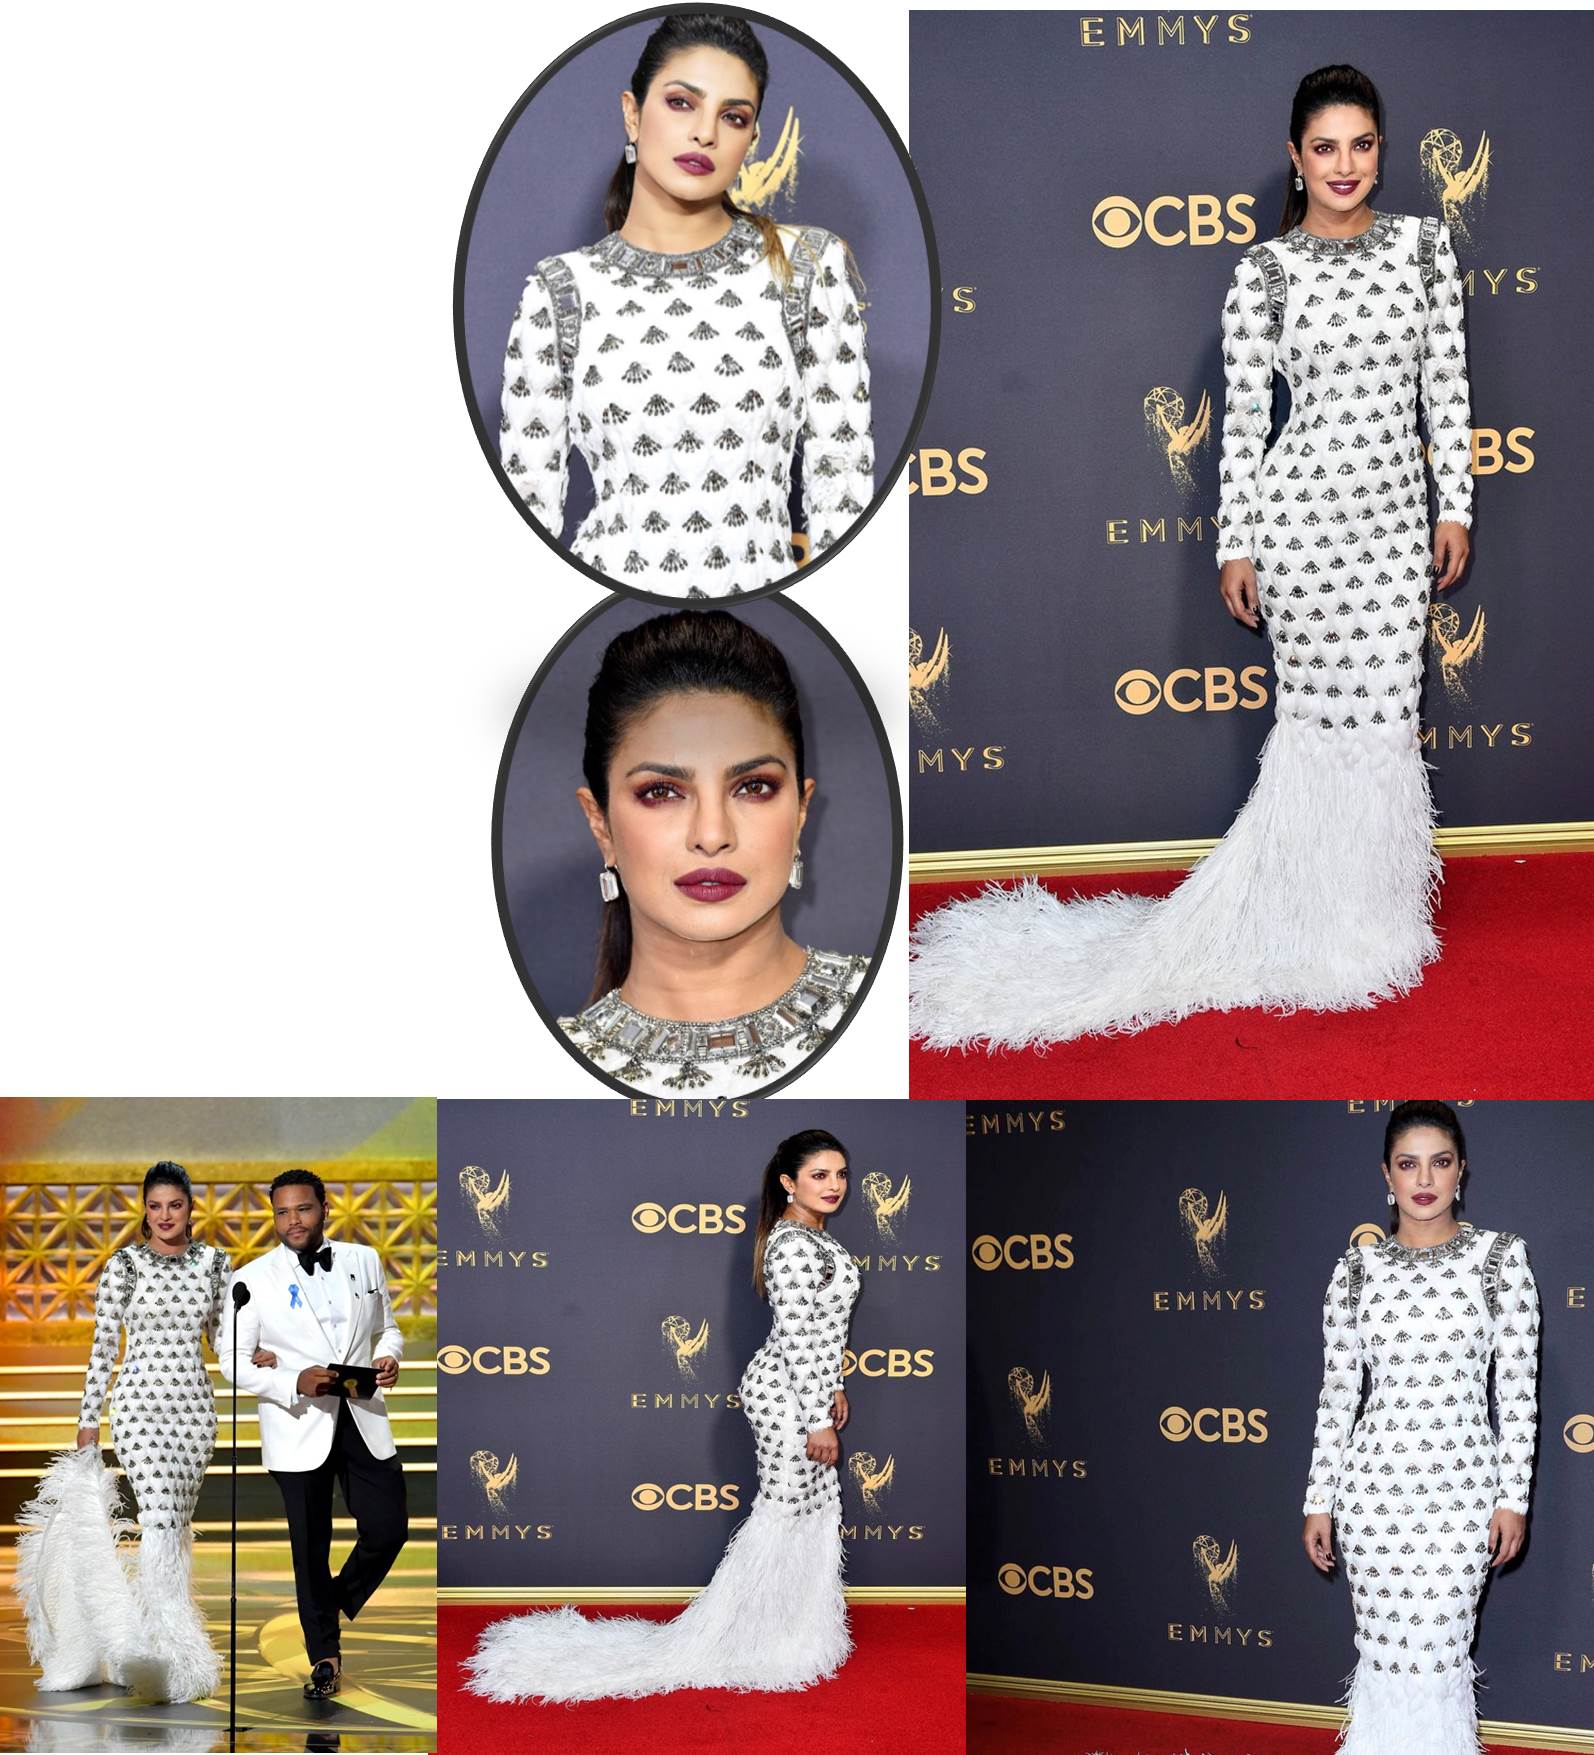 Priyanka Chopra wore a custom-made BALMAIN gown to attend the 2017 Emmys Awards in Los Angeles. 